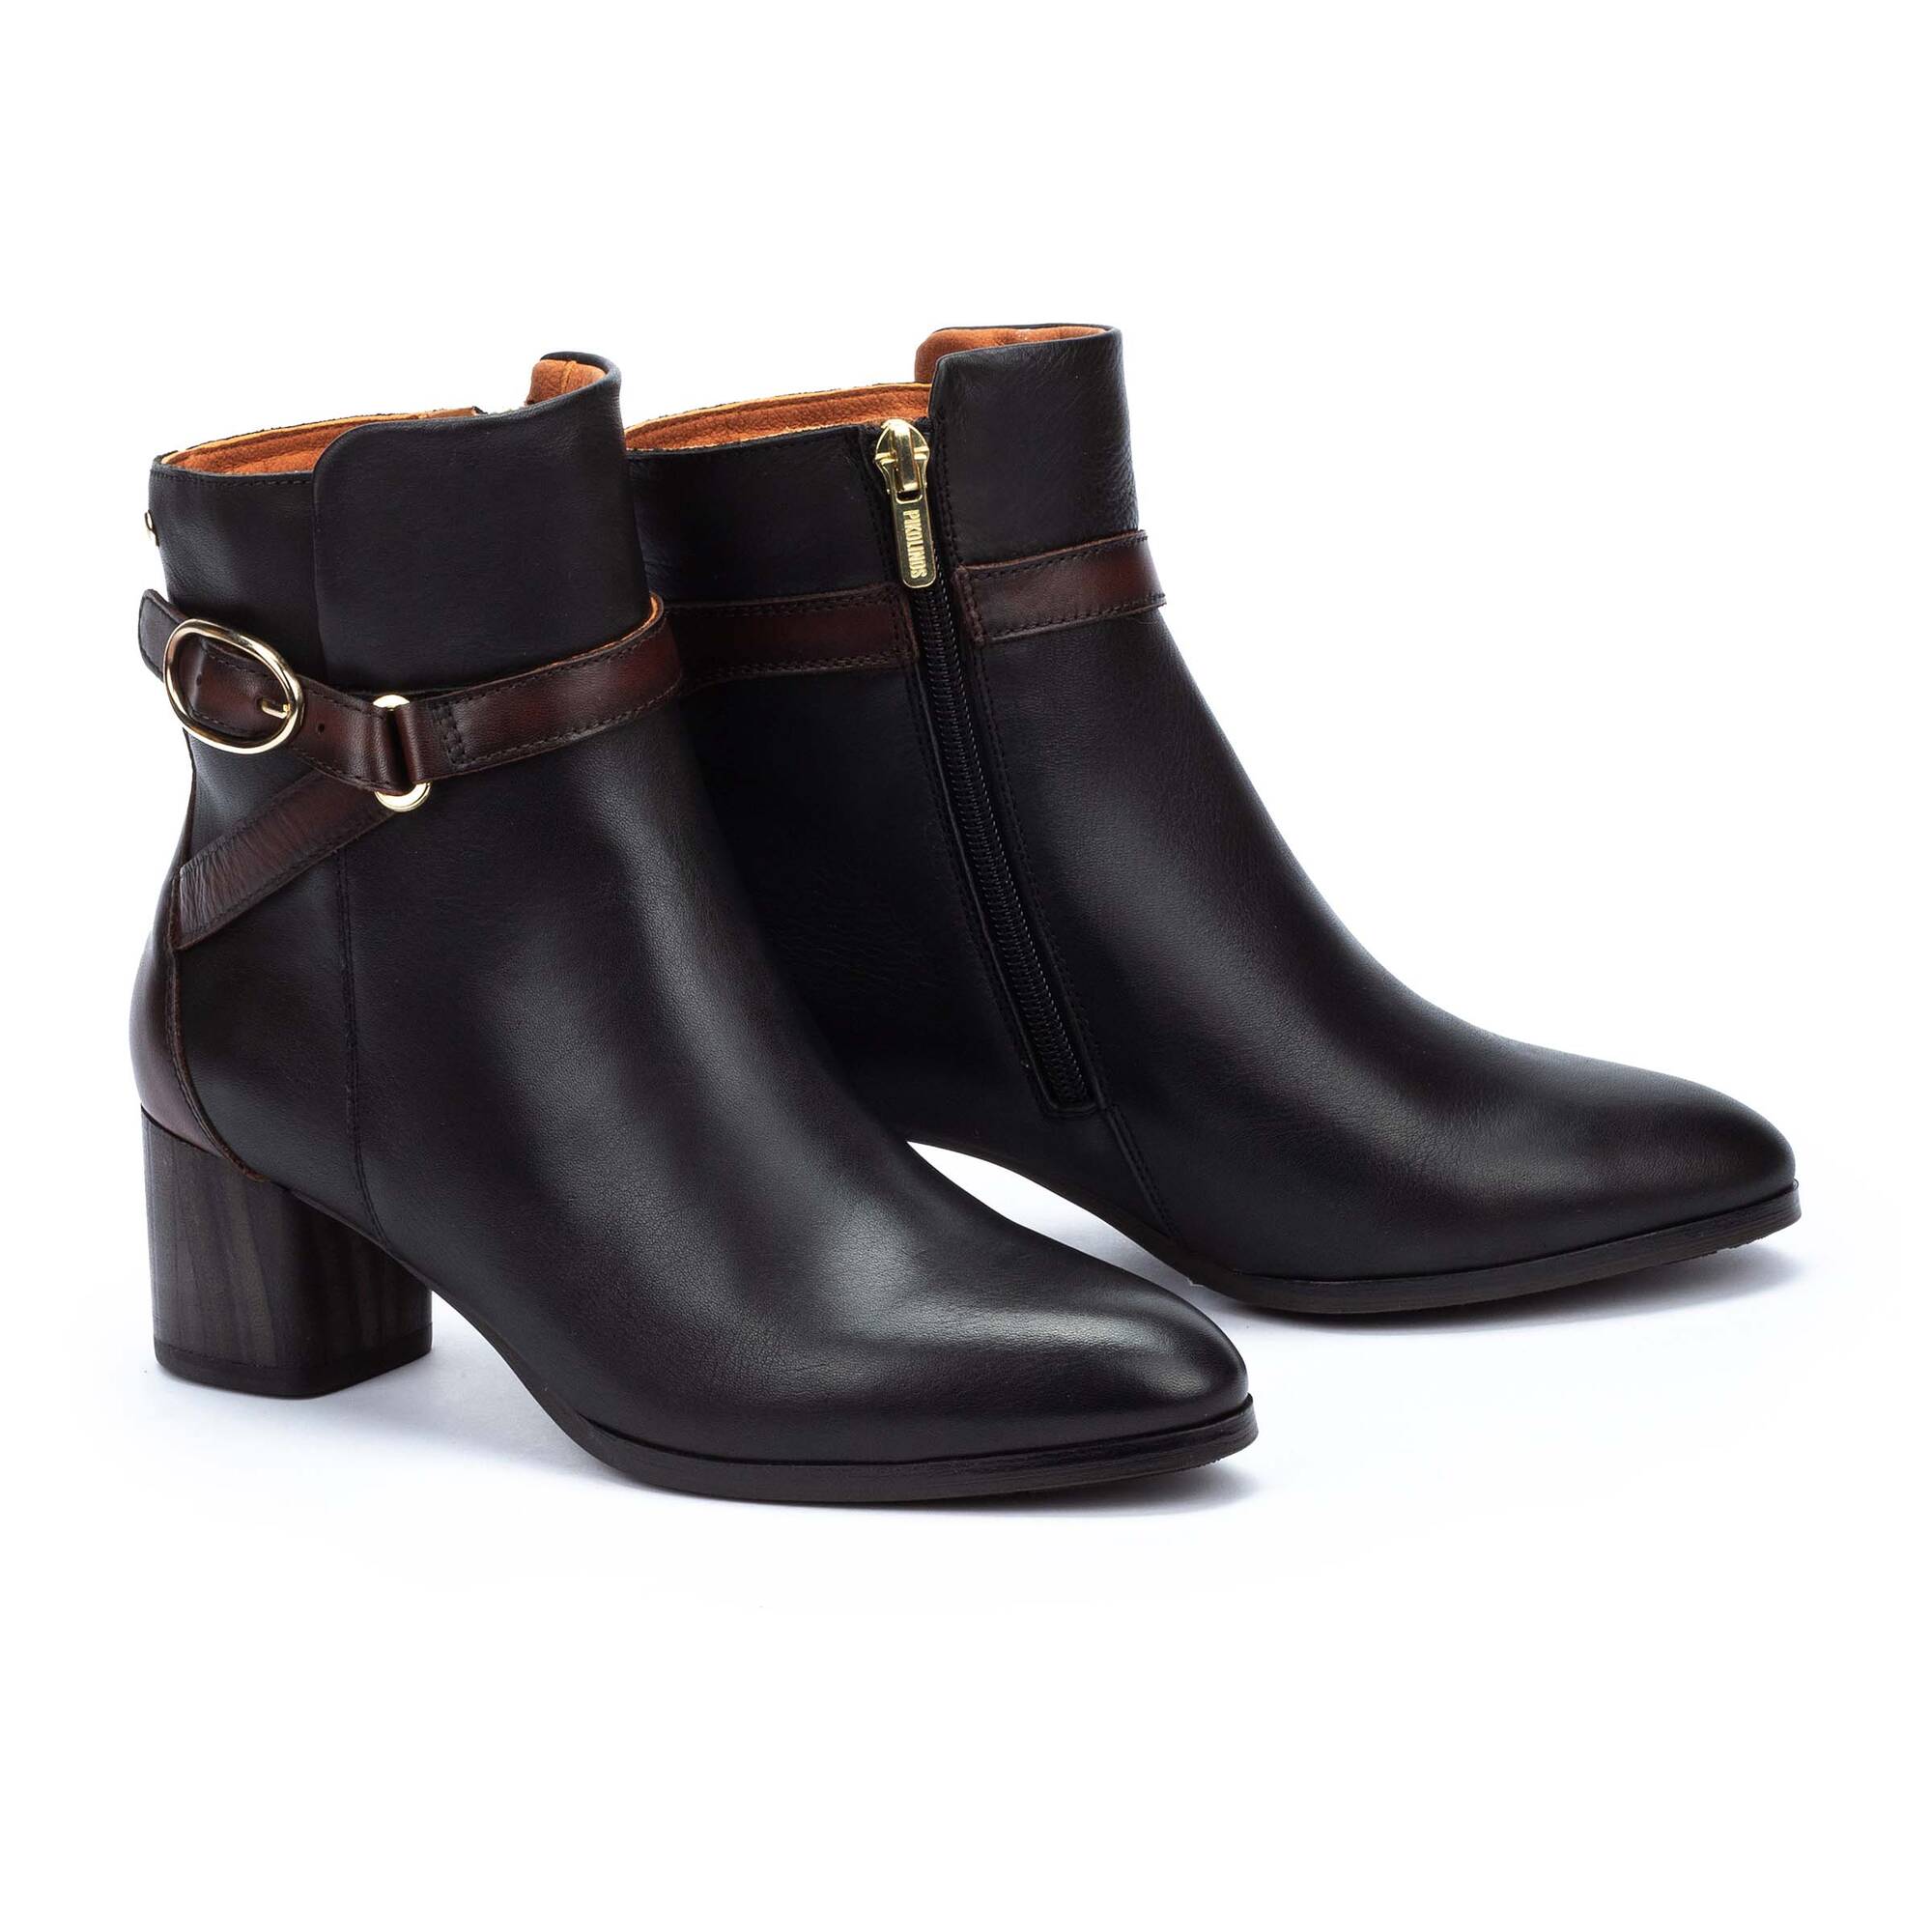 Booties | CALAFAT W1Z-8977C1, BLACK, large image number 100 | null